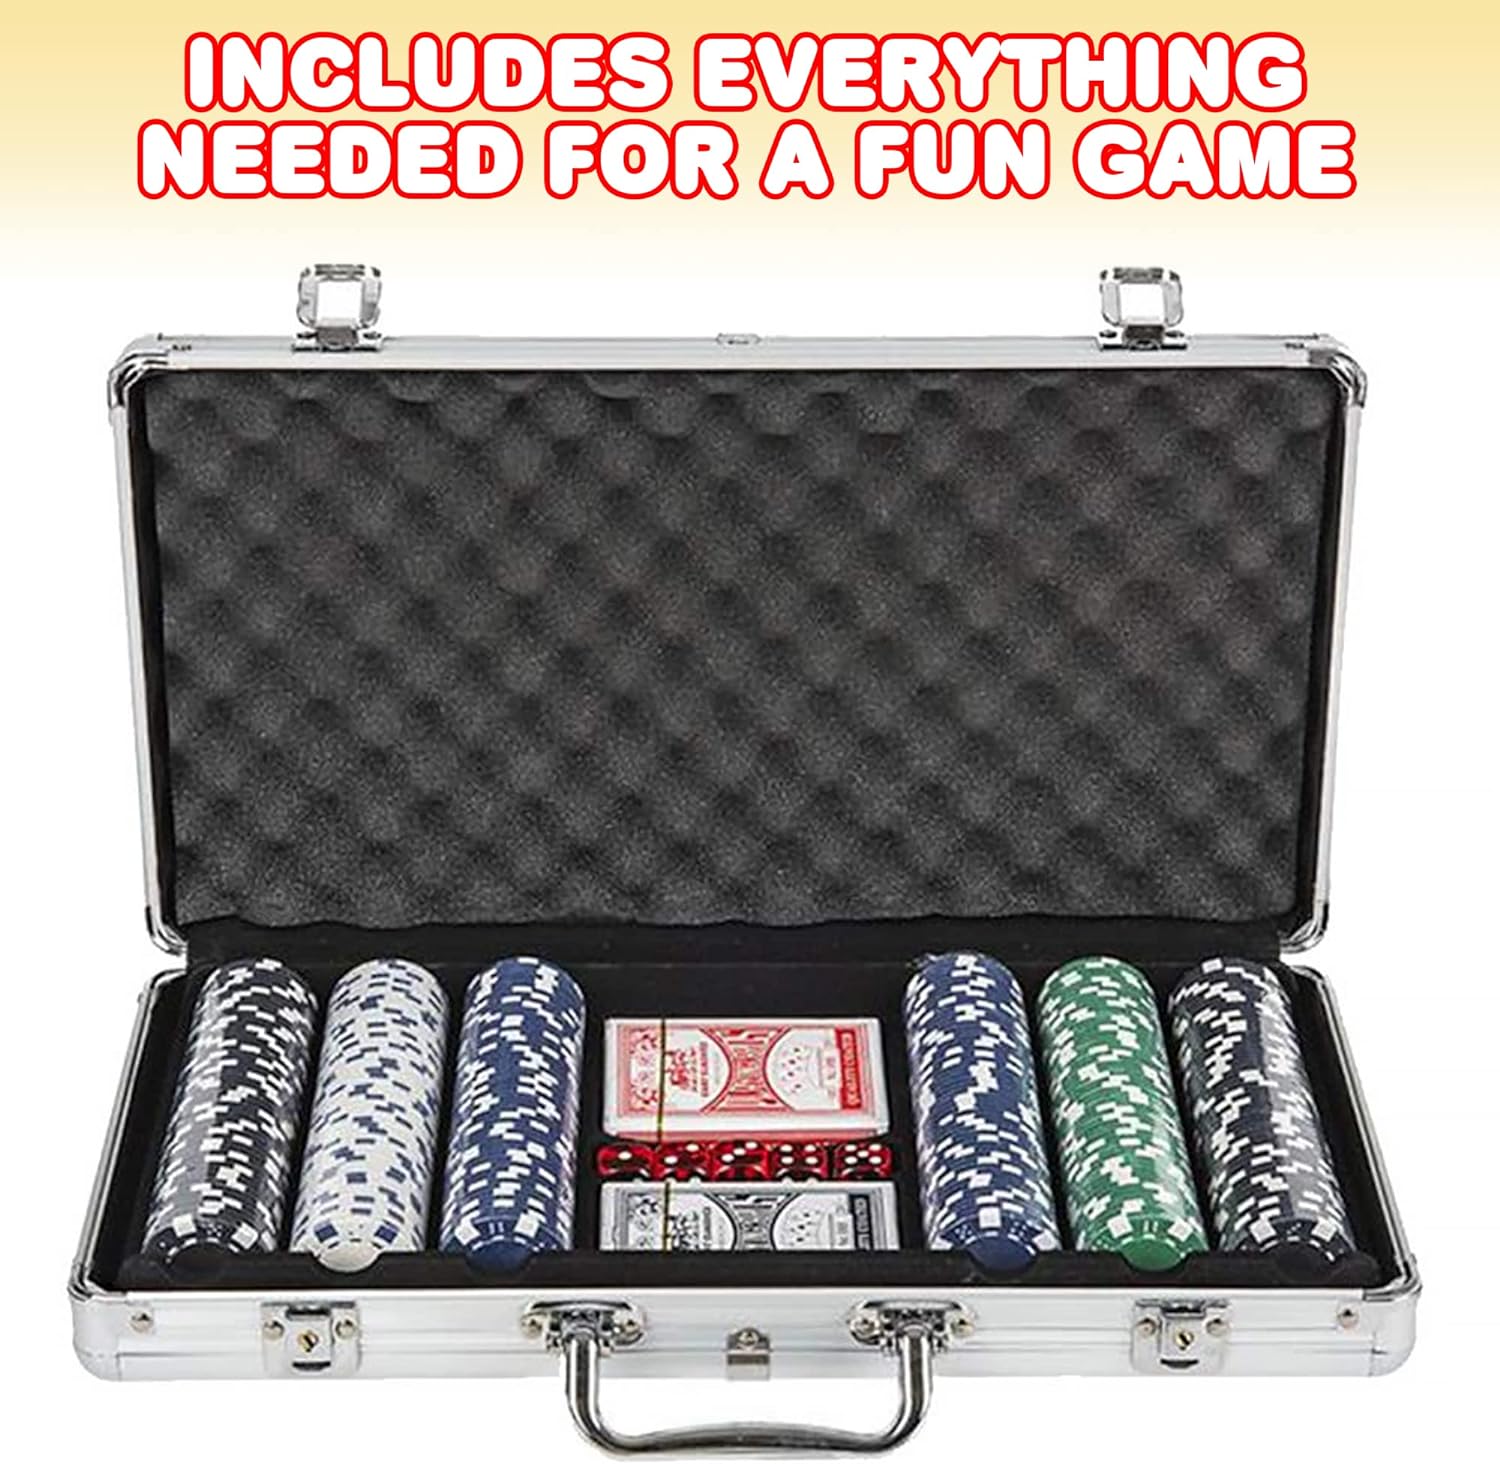 Poker Set in Aluminum Case, Casino Poker chip Kit with 300 Chips, 2 Decks of Playing Cards, 5 Dice, and 1 Deluxe Case, Fun Game Night Supplies, Best Poker Gifts for Teens and Adults, Black